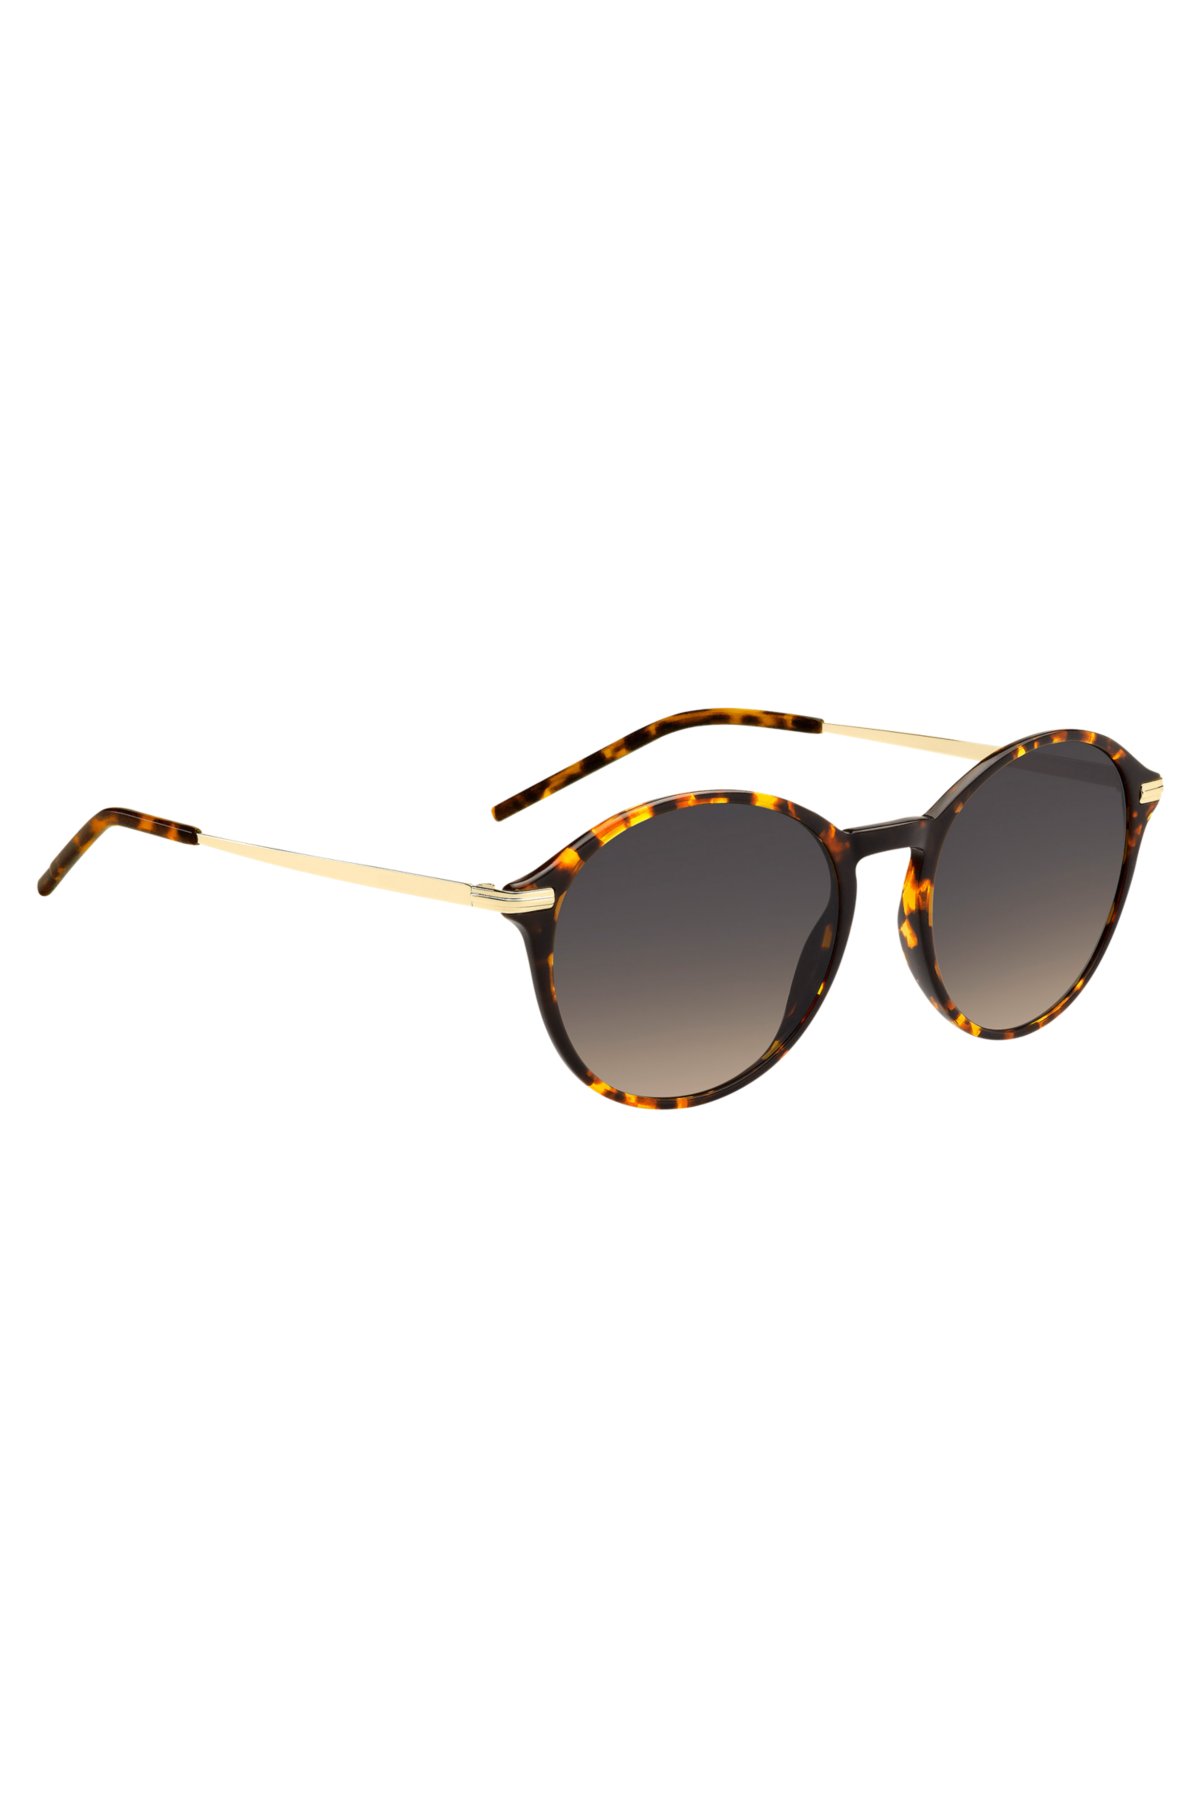 Round sunglasses in Havana acetate with gold-tone temples, Brown